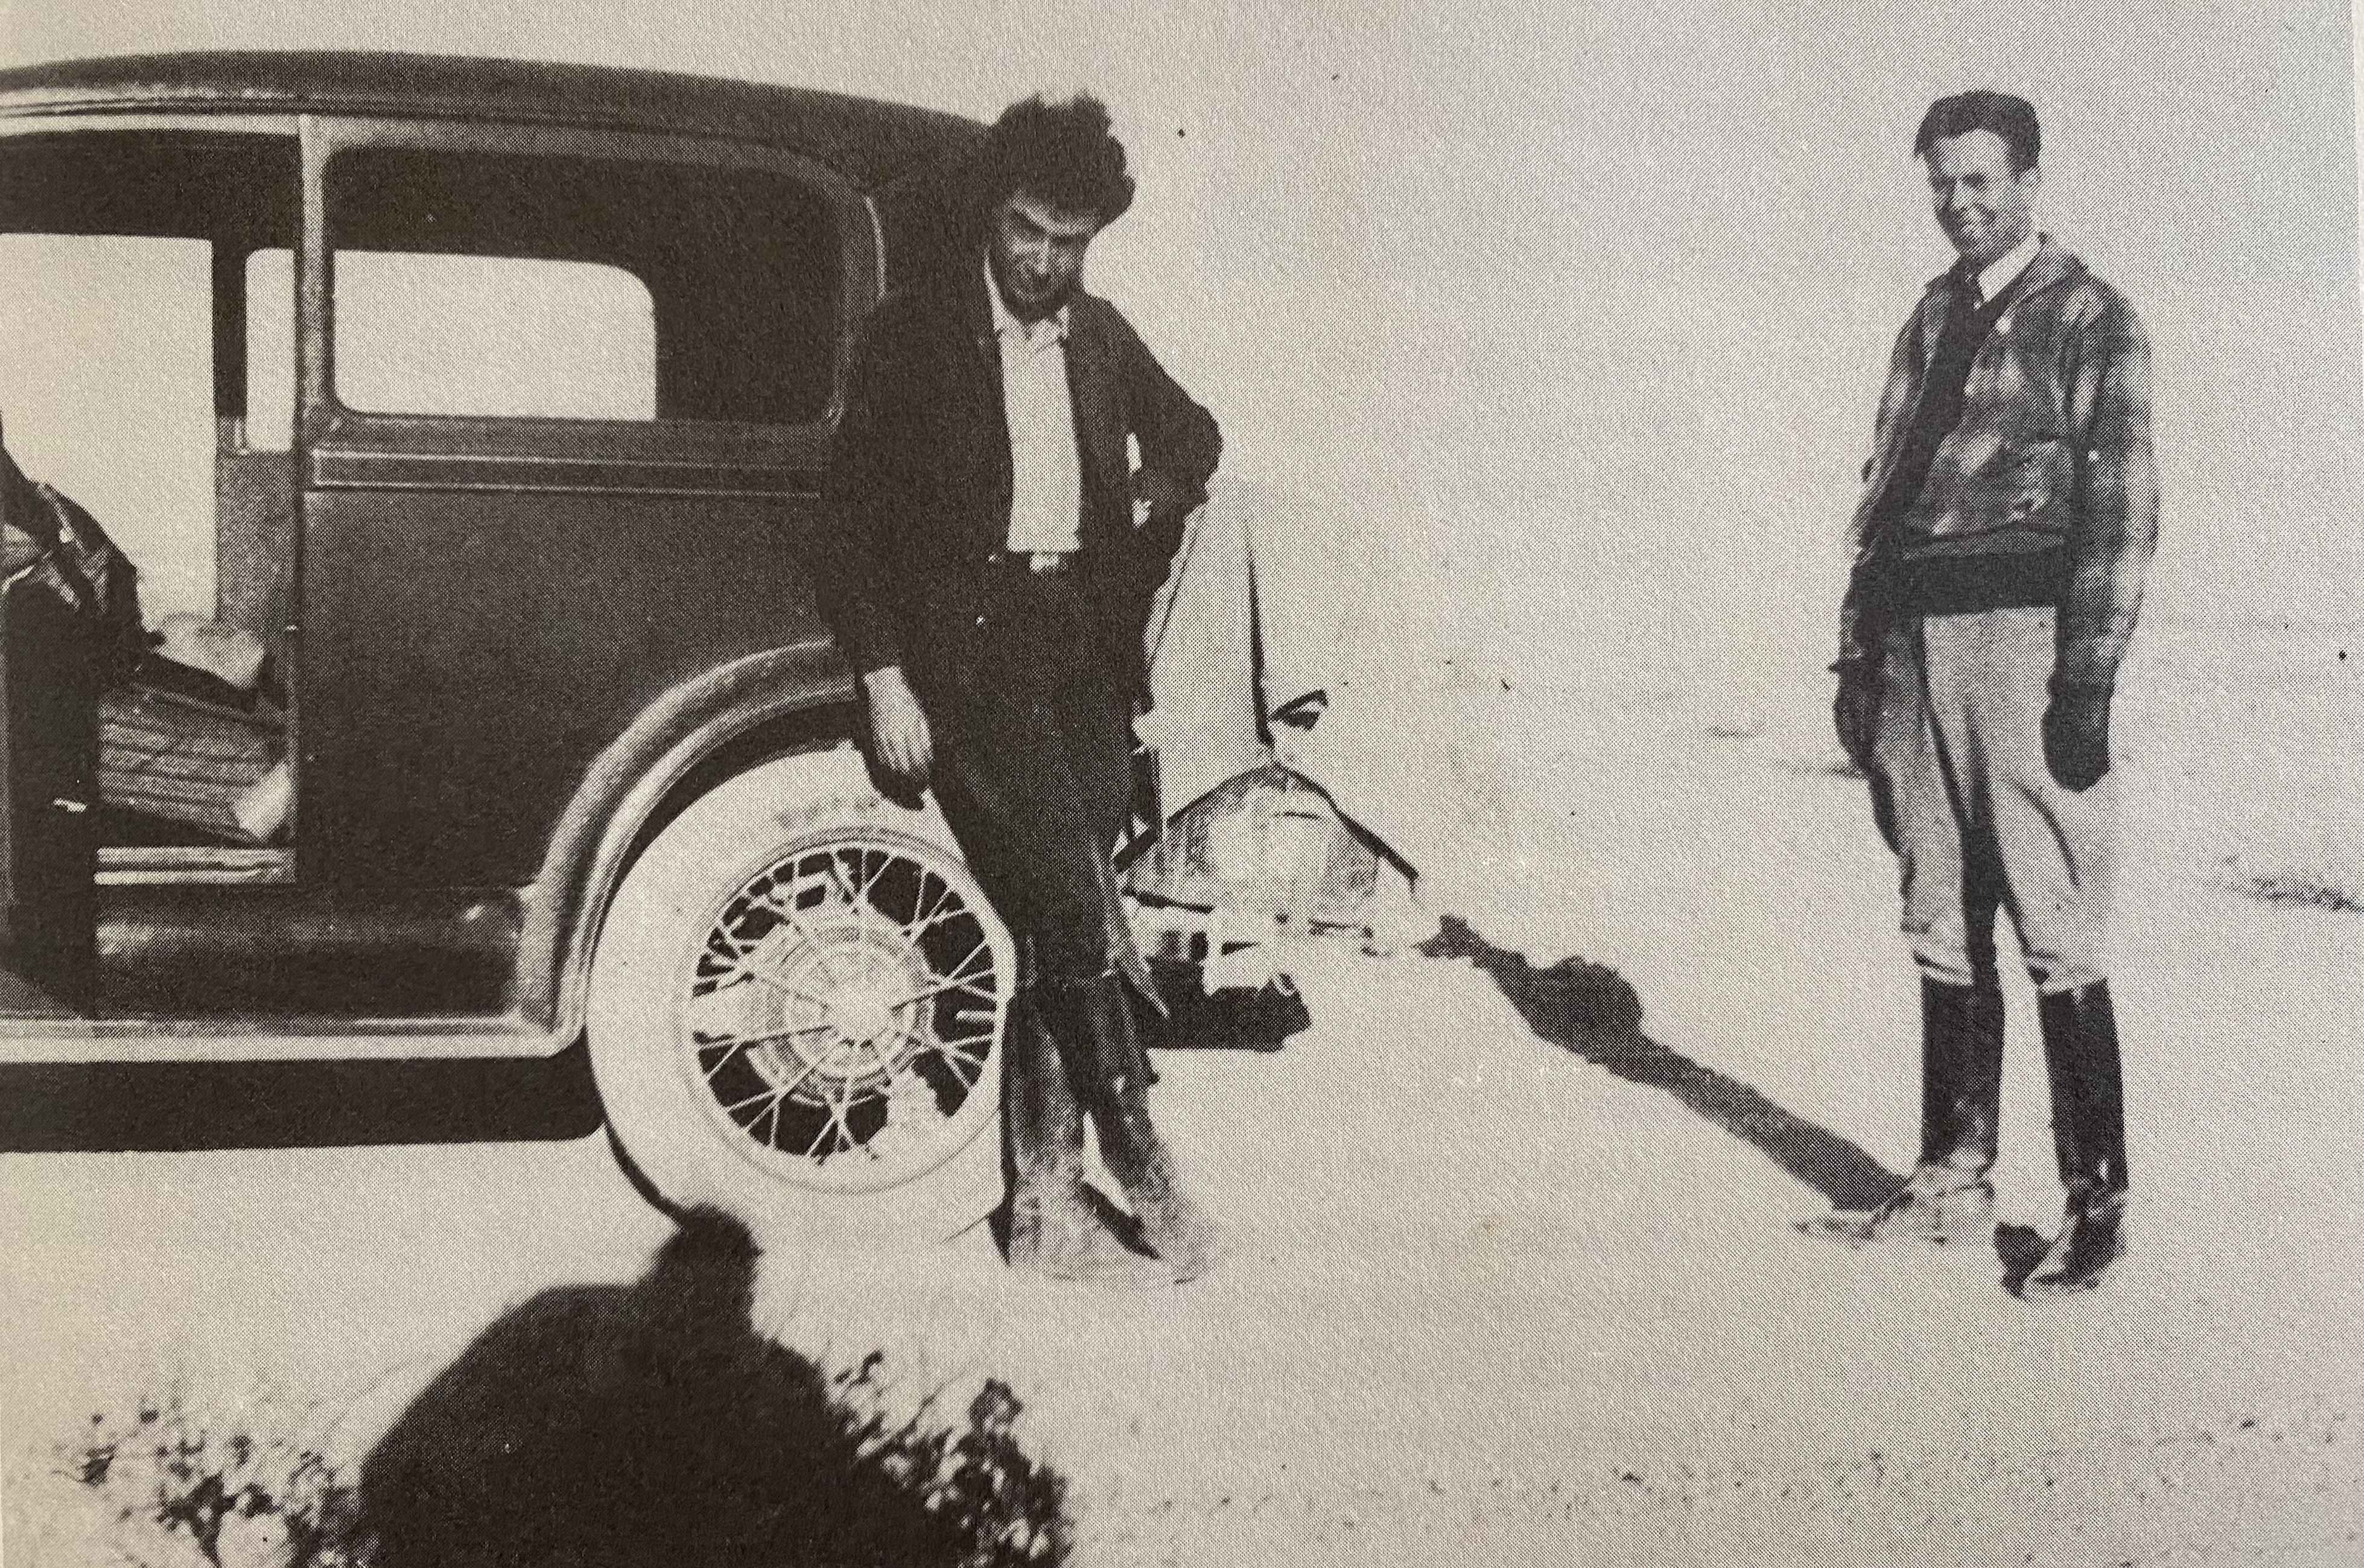 Black and white photo of Oppenheimer and Ernest Lawrence standing next to a car in the New Mexico desert.